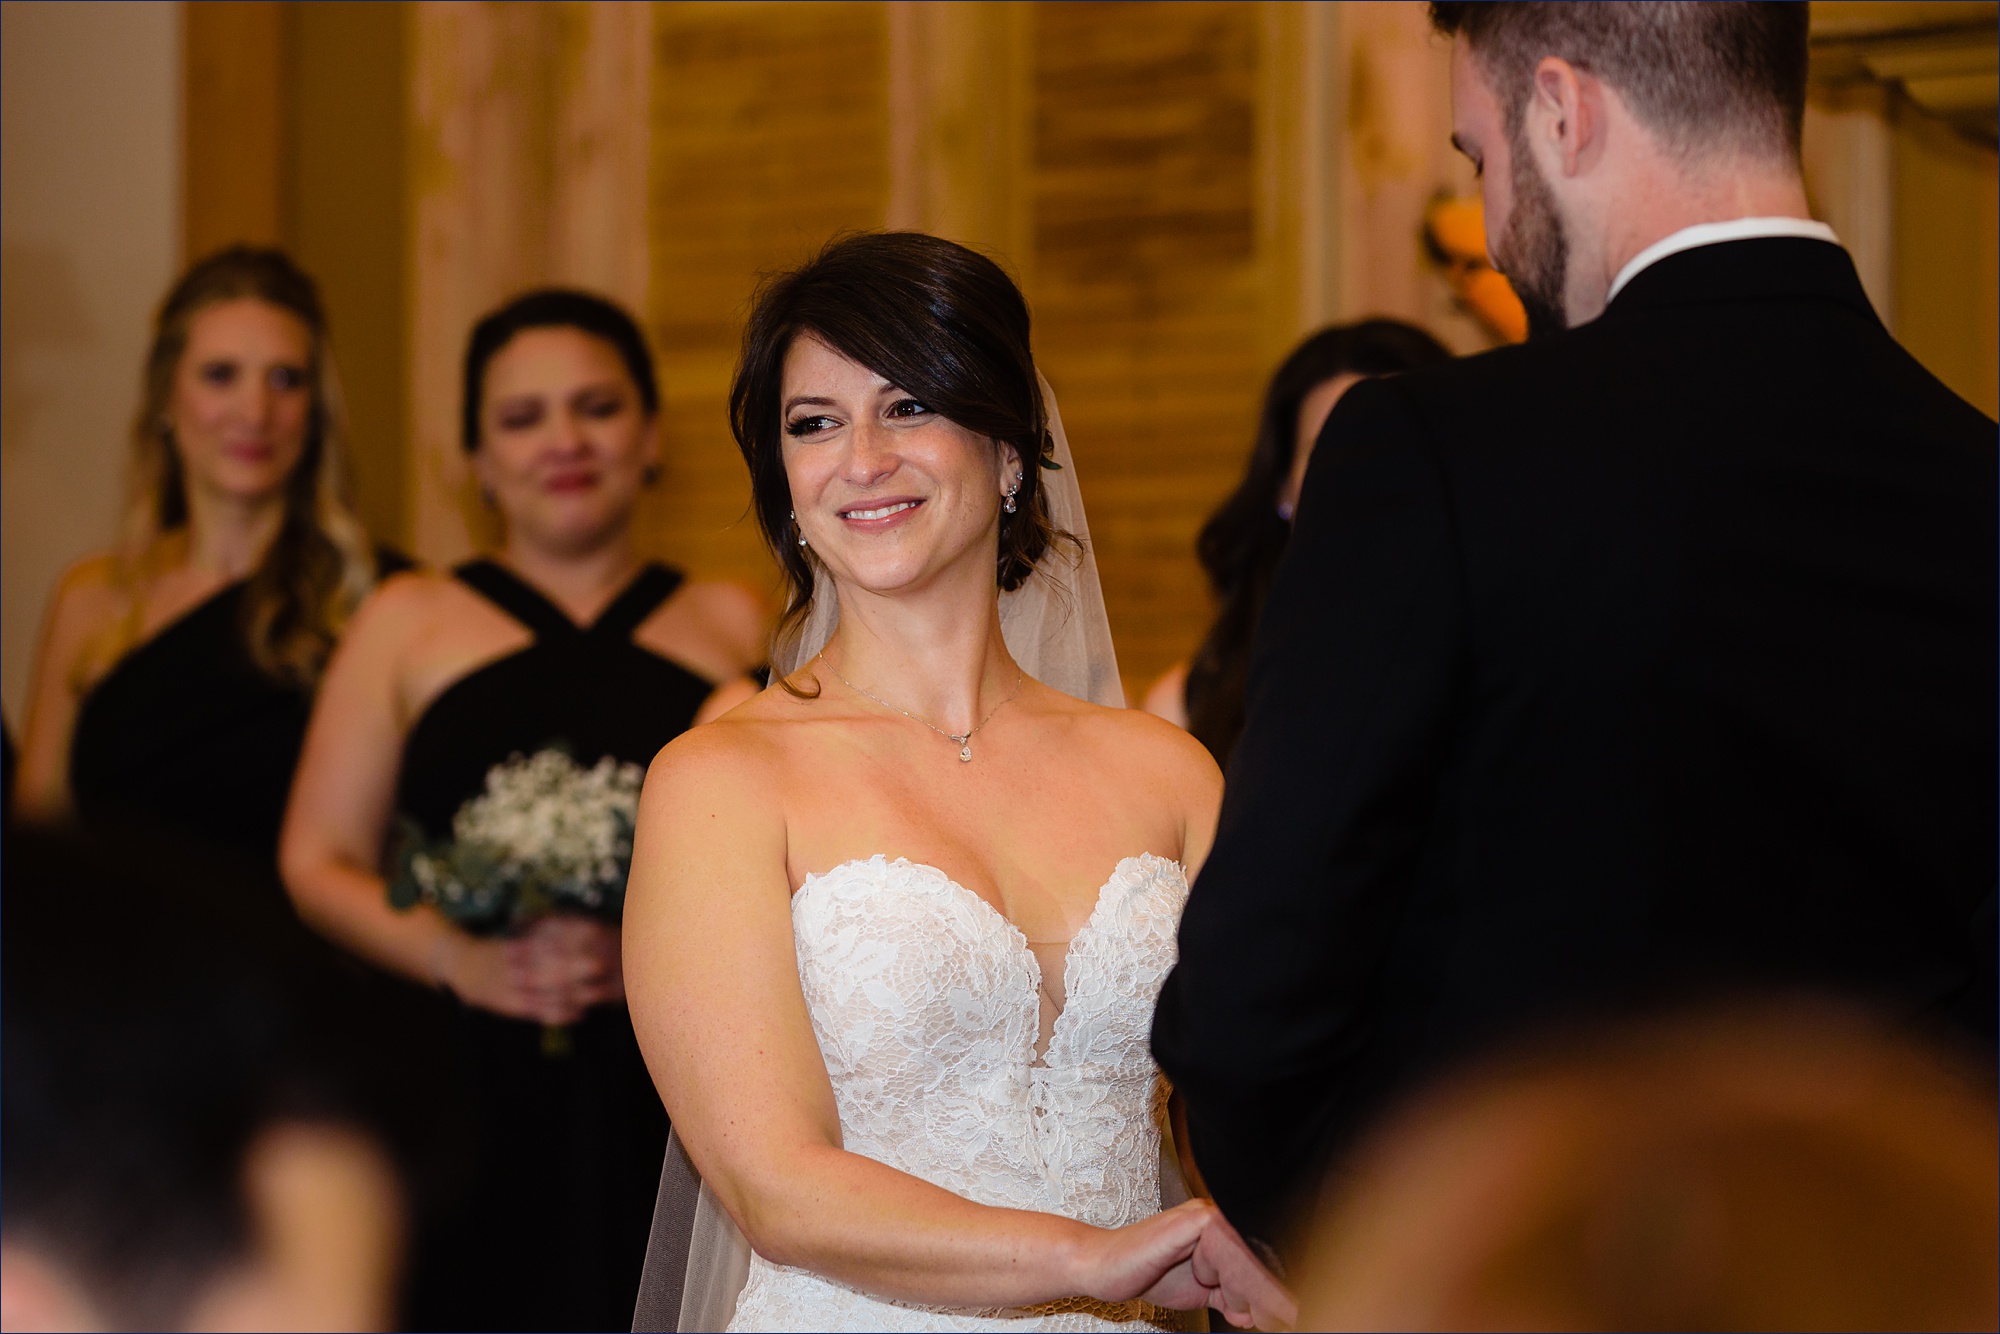 The bride smiles at her family as the wedding ceremony takes place